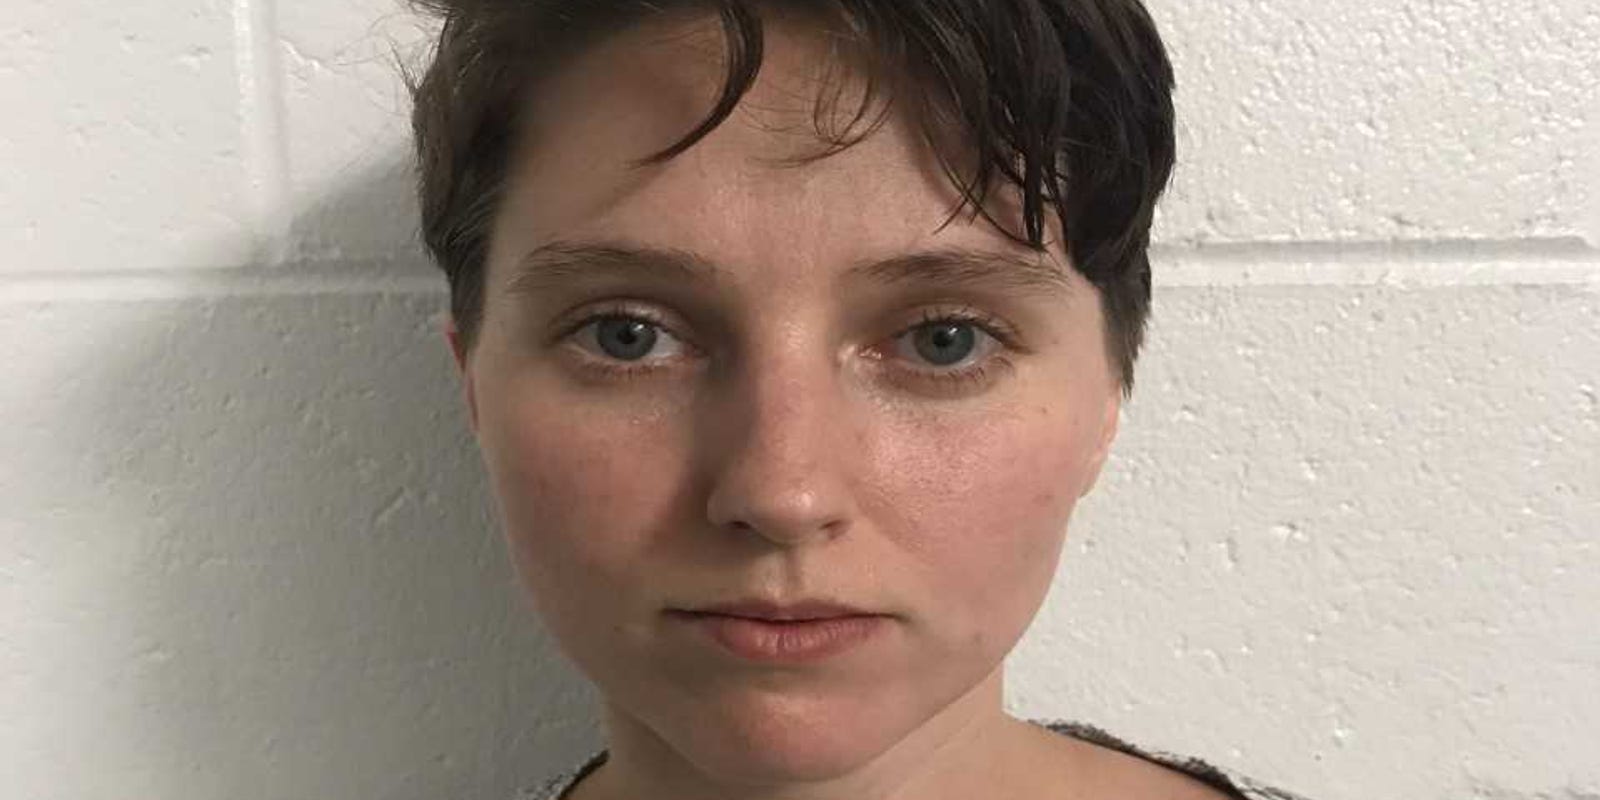 Mother Daughter Homemade Porn - Kayla Parker charged after allegedly making porn with daughter